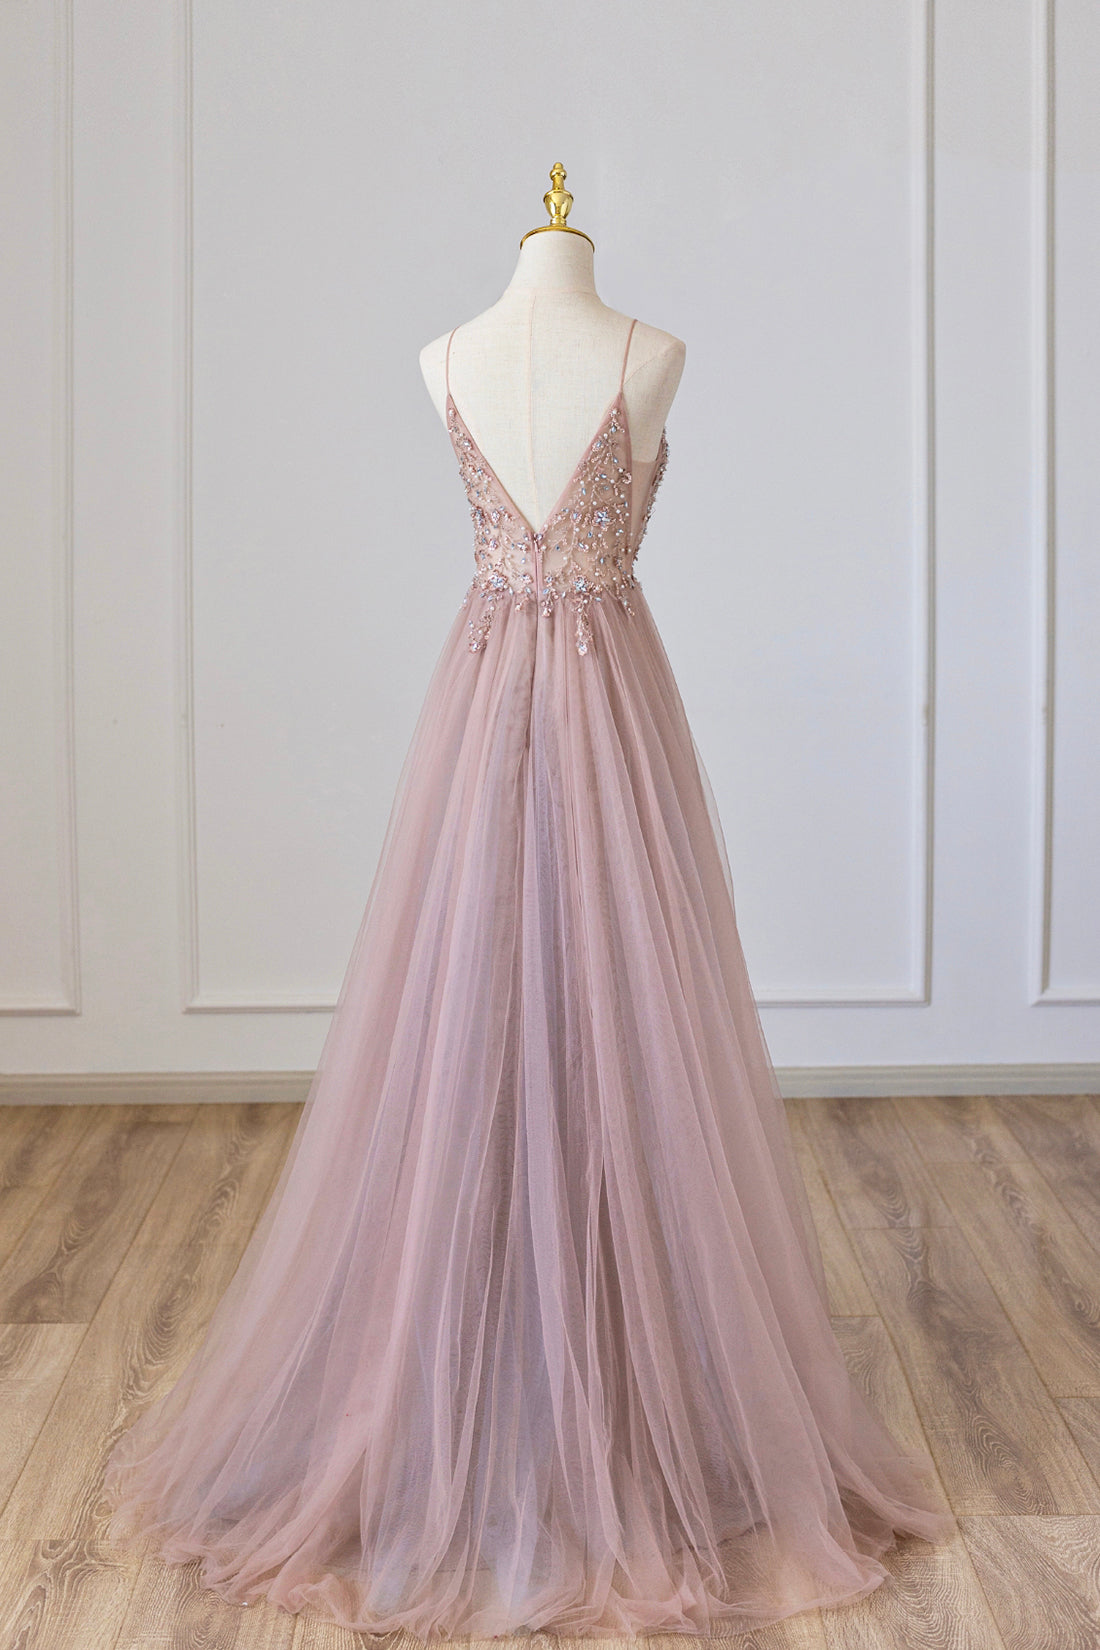 Yareli | Pink Tulle Long A-Line Prom Dress, Pink Spaghetti Formal Dress with Beaded